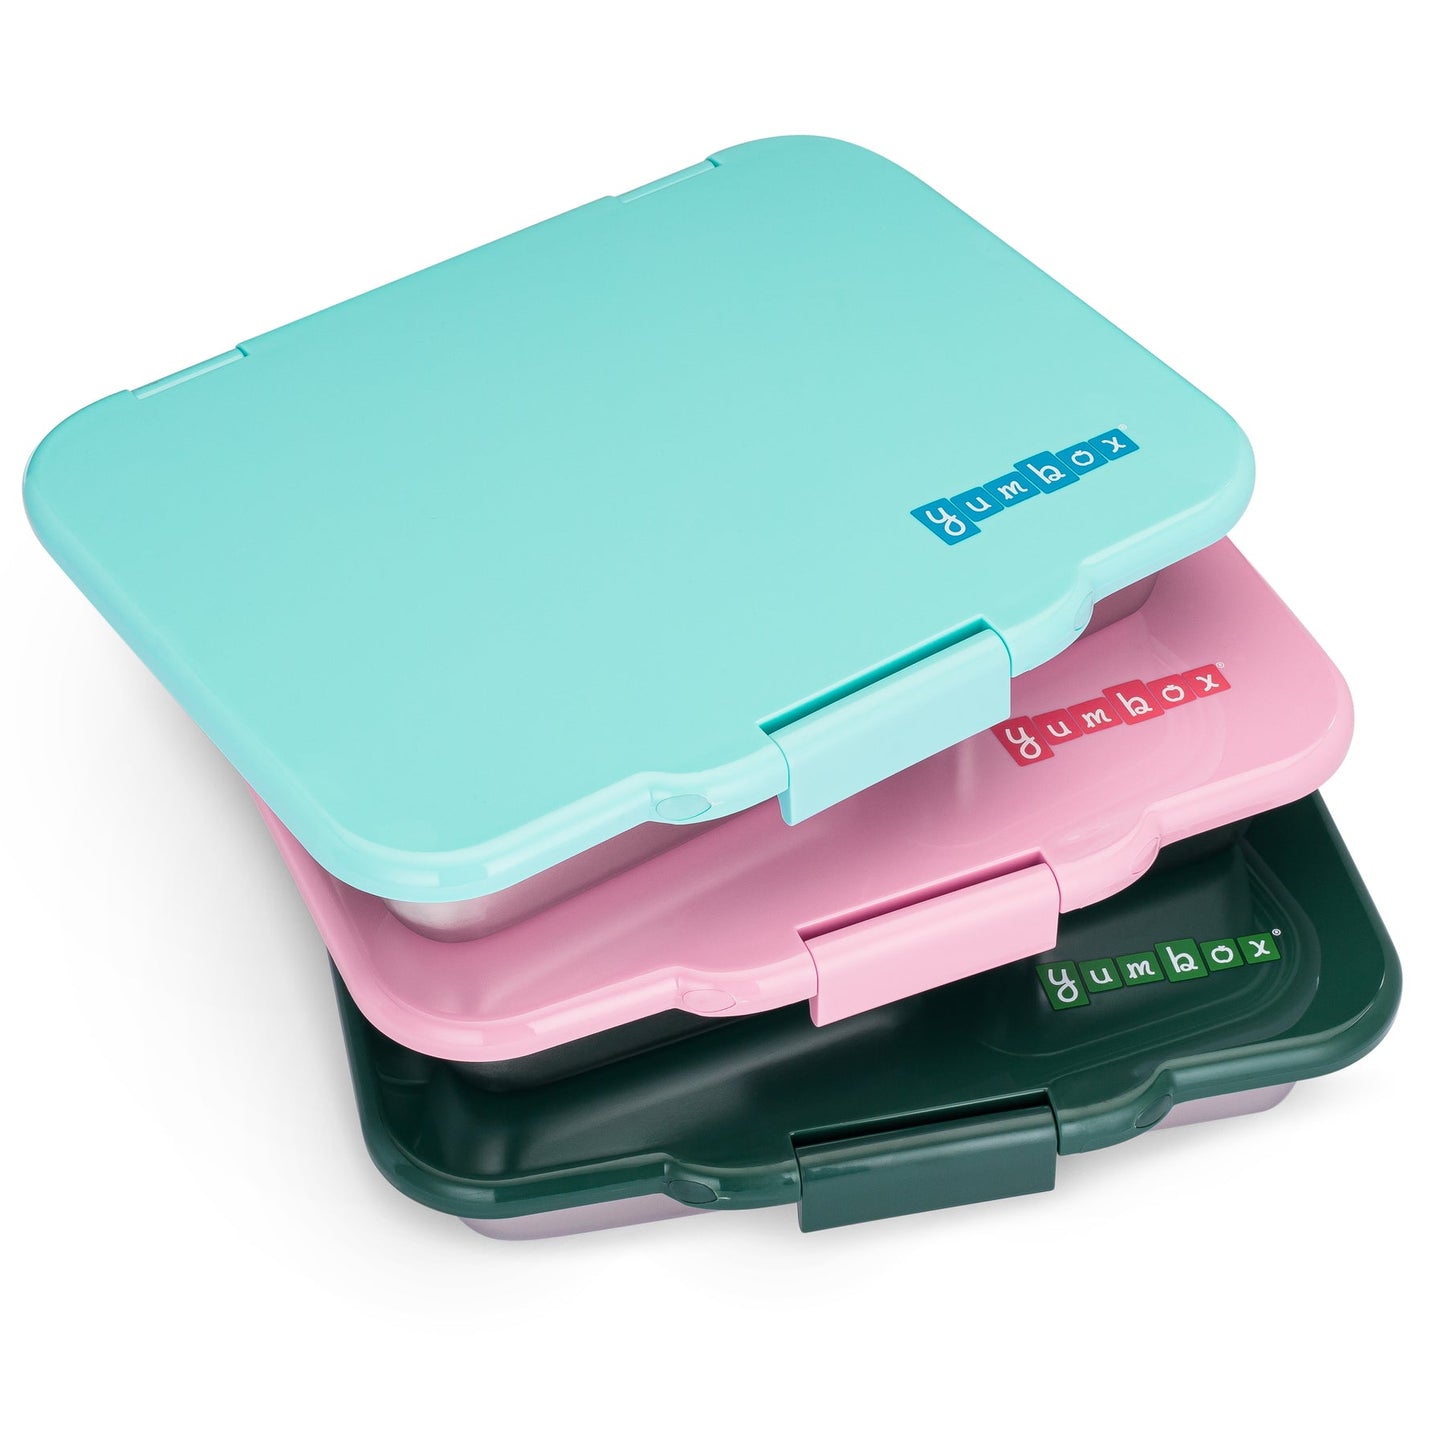 Yumbox Presto 5 Compartment Stainless Steel Lunch Box - Tulum Blue - Laadlee